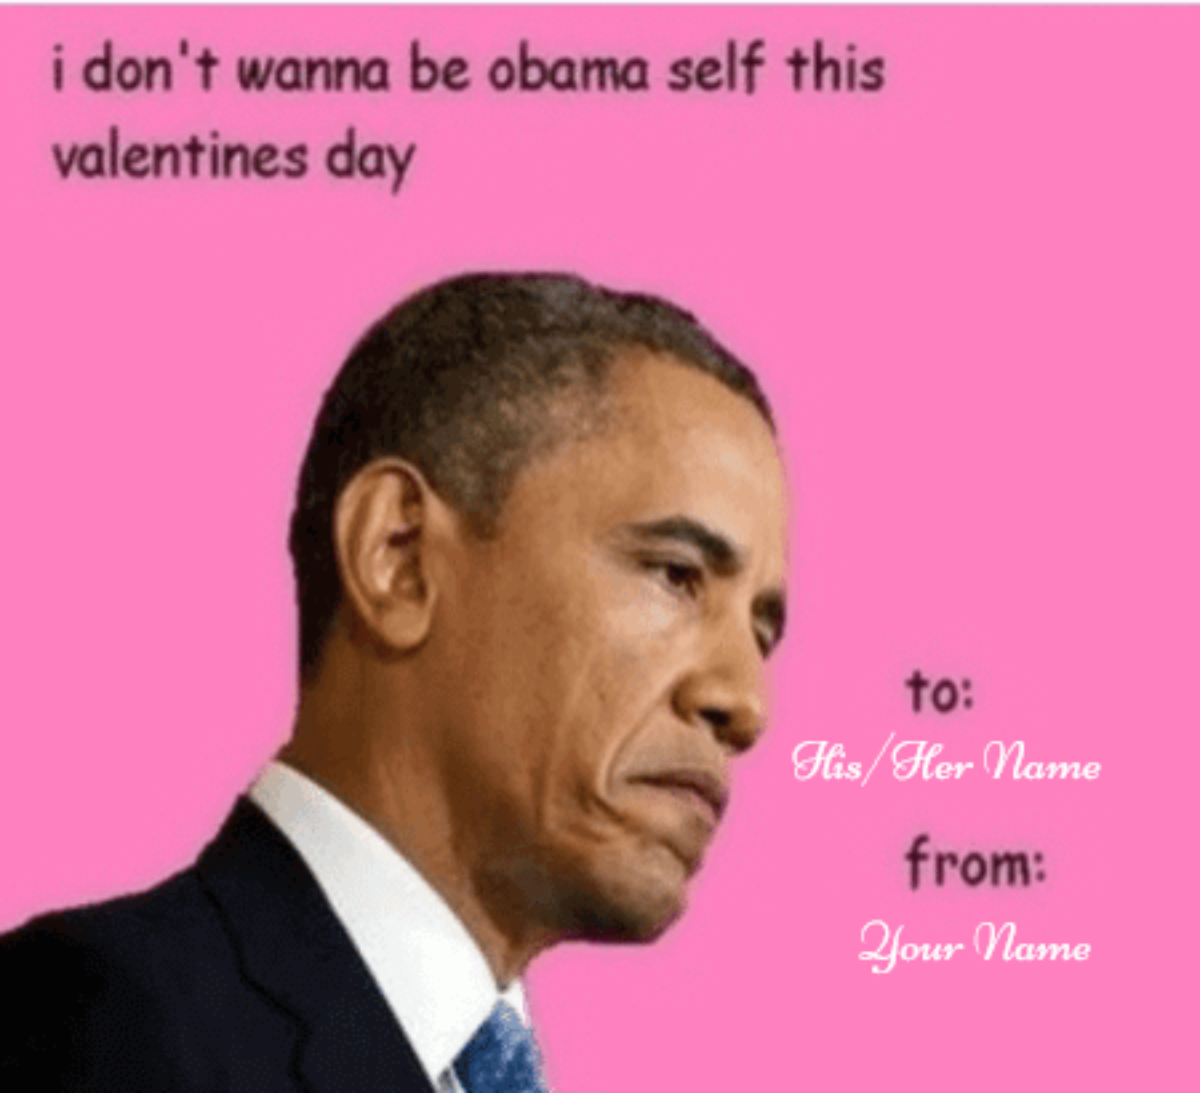 Funny Valentines Day Card Memes - Funny Valentines Card Wishes